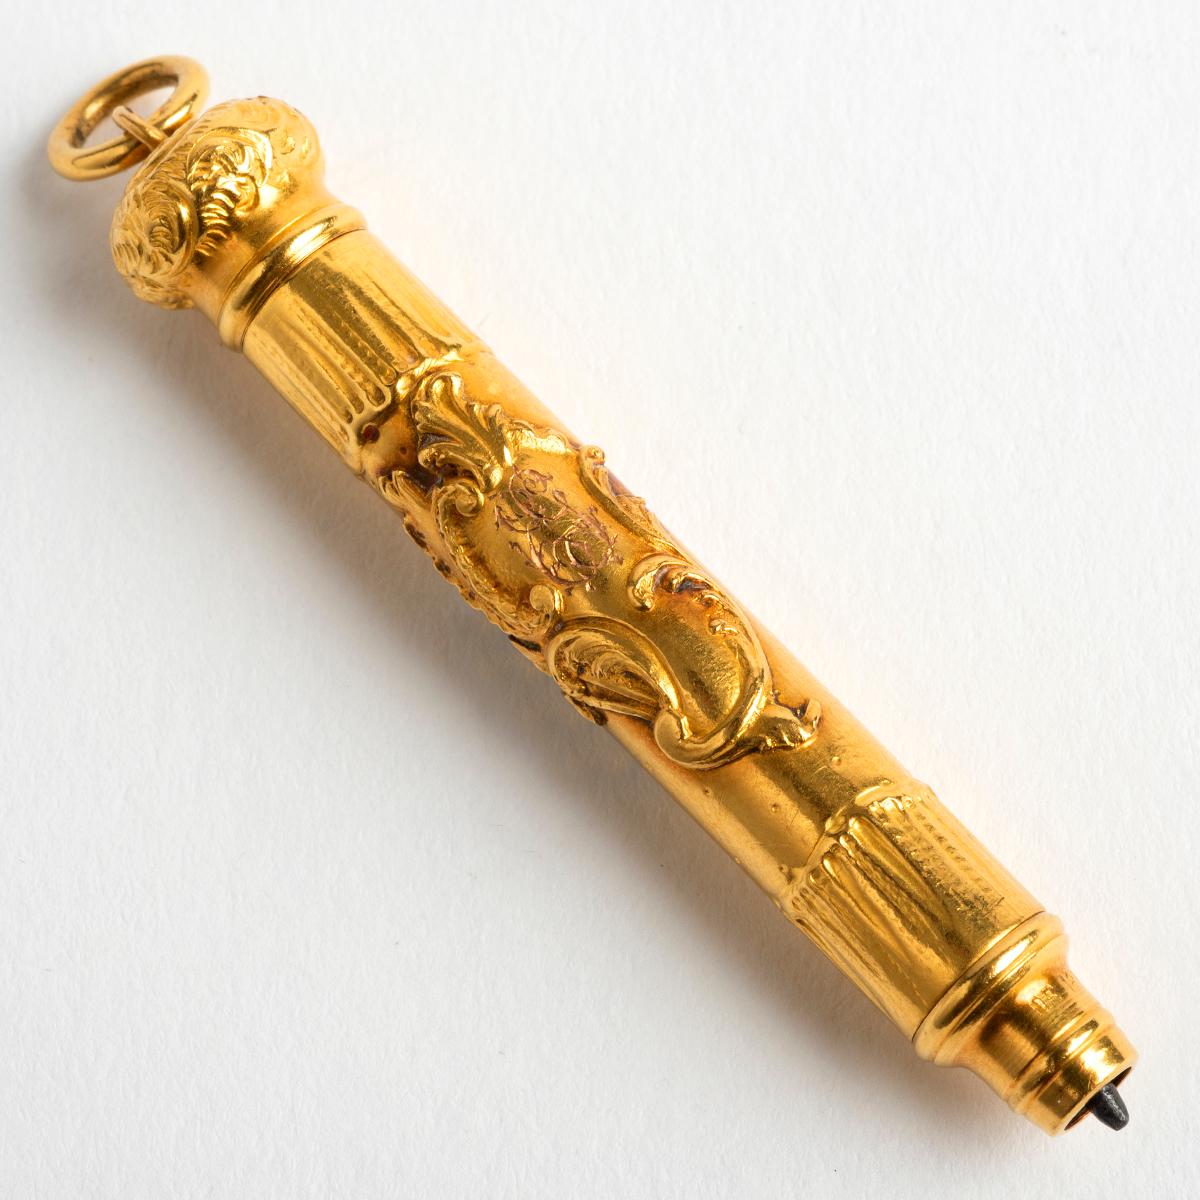 Our antique 18k yellow gold telescopic pencil would, in period, (circa 1910s/ 1920s) likely be fitted by its hoop to an Albert Chain, and in period be used by gentry for keeping and monitoring sporting scores, such as equestrian pursuits, golf or